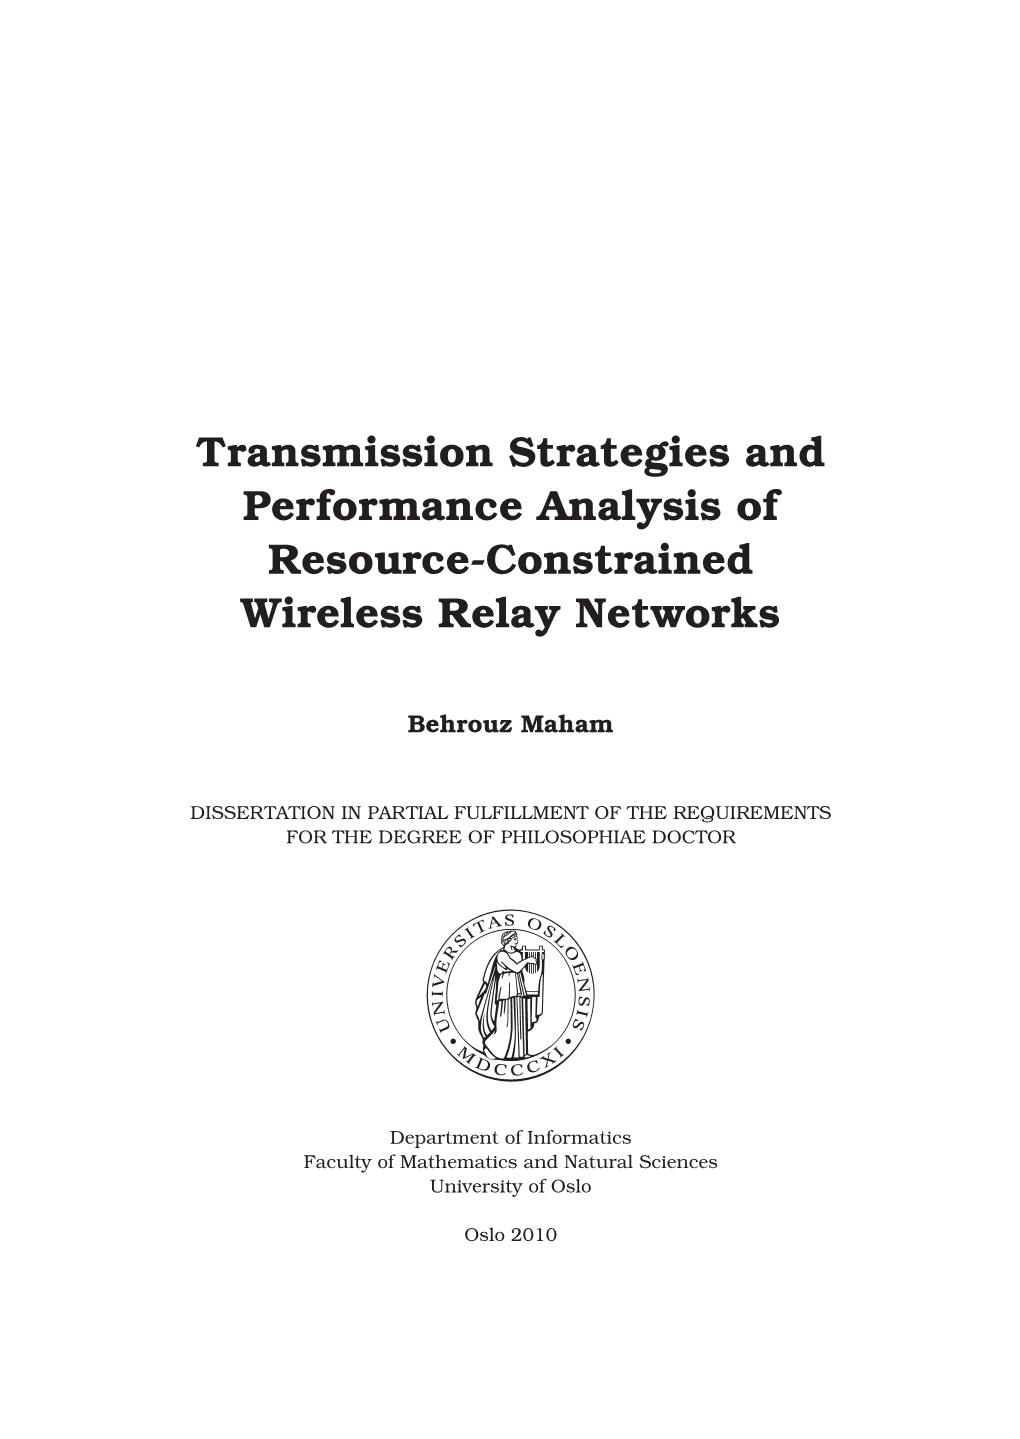 Transmission Strategies and Performance Analysis of Resource-Constrained Wireless Relay Networks